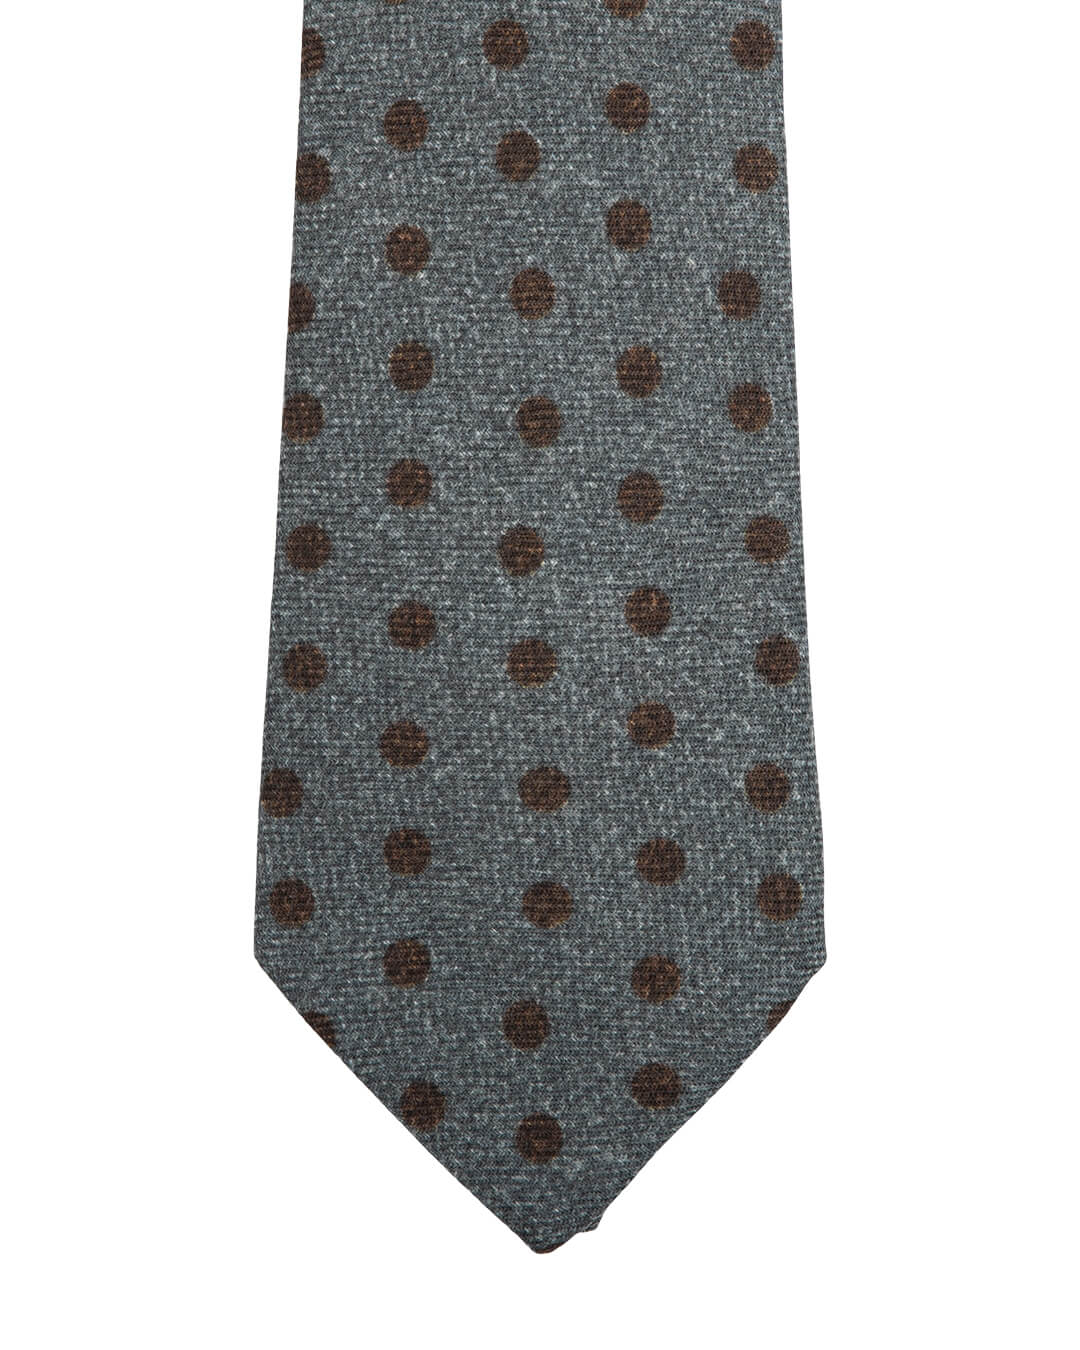 Tie Grey With Brown Spots